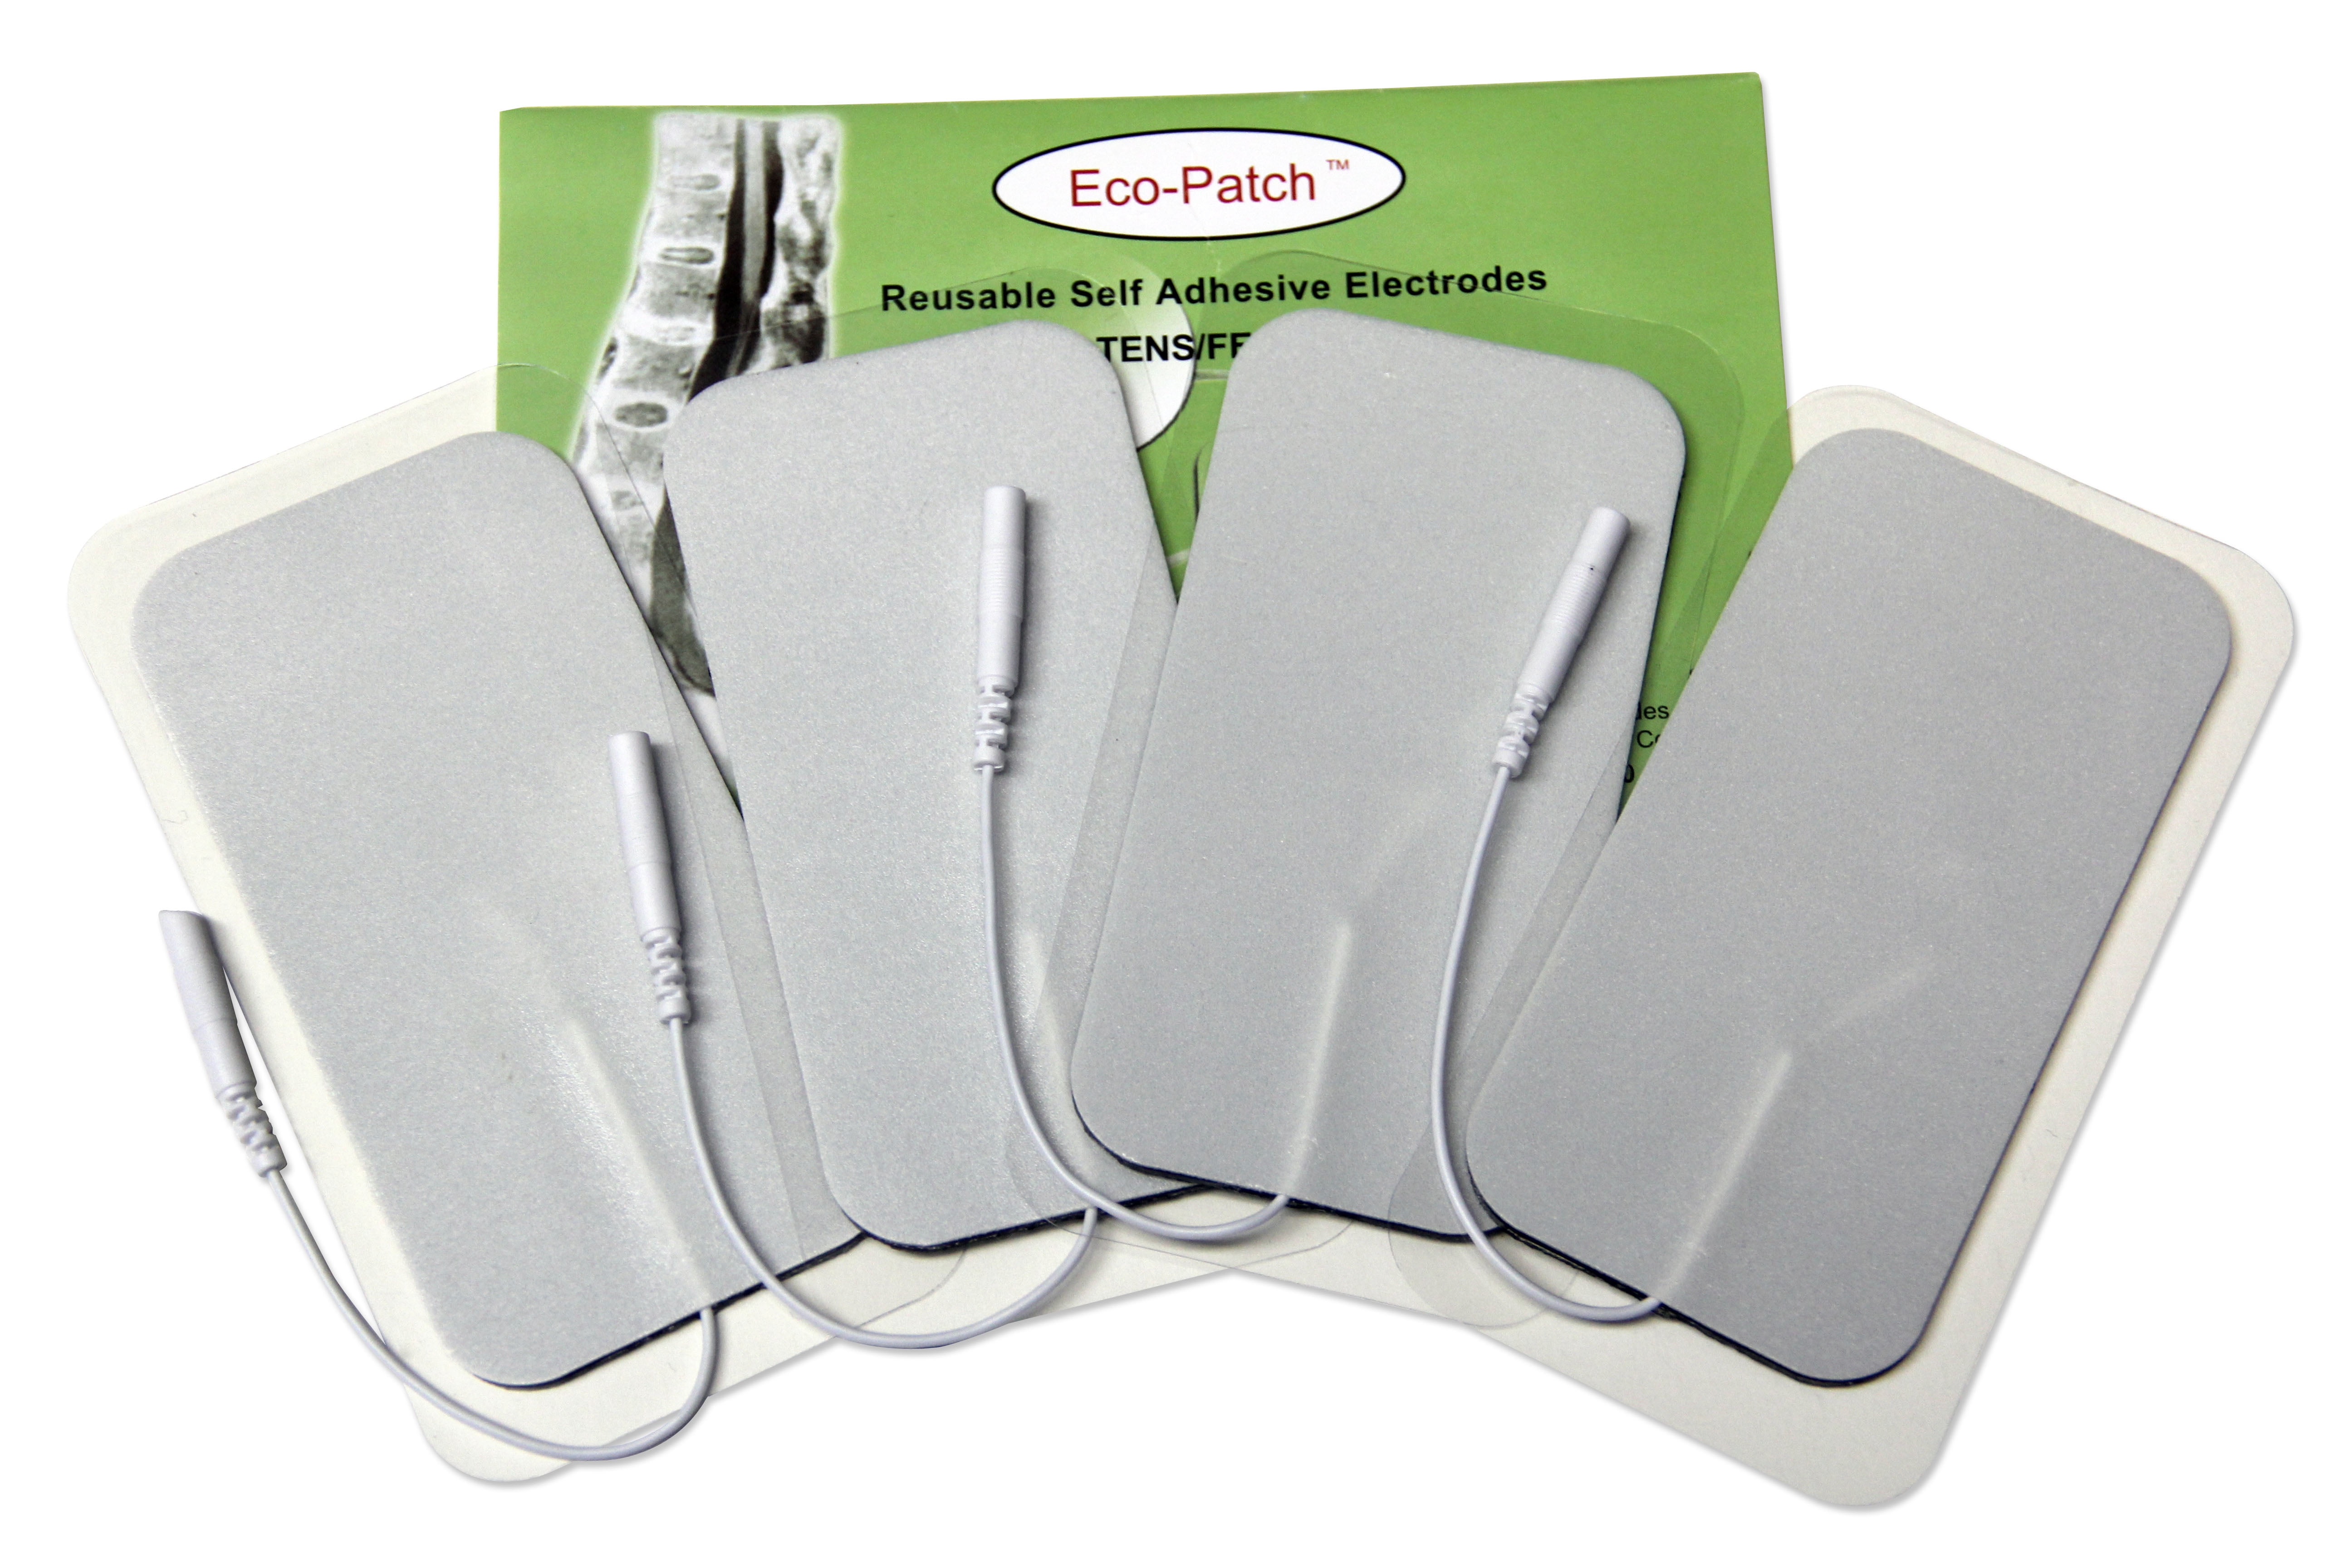 Provide comfortable electrotherapy with PALS Electrodes, compatible with  all FES & TENS applications. Shop the pads made of MultiStick hydrogel now!